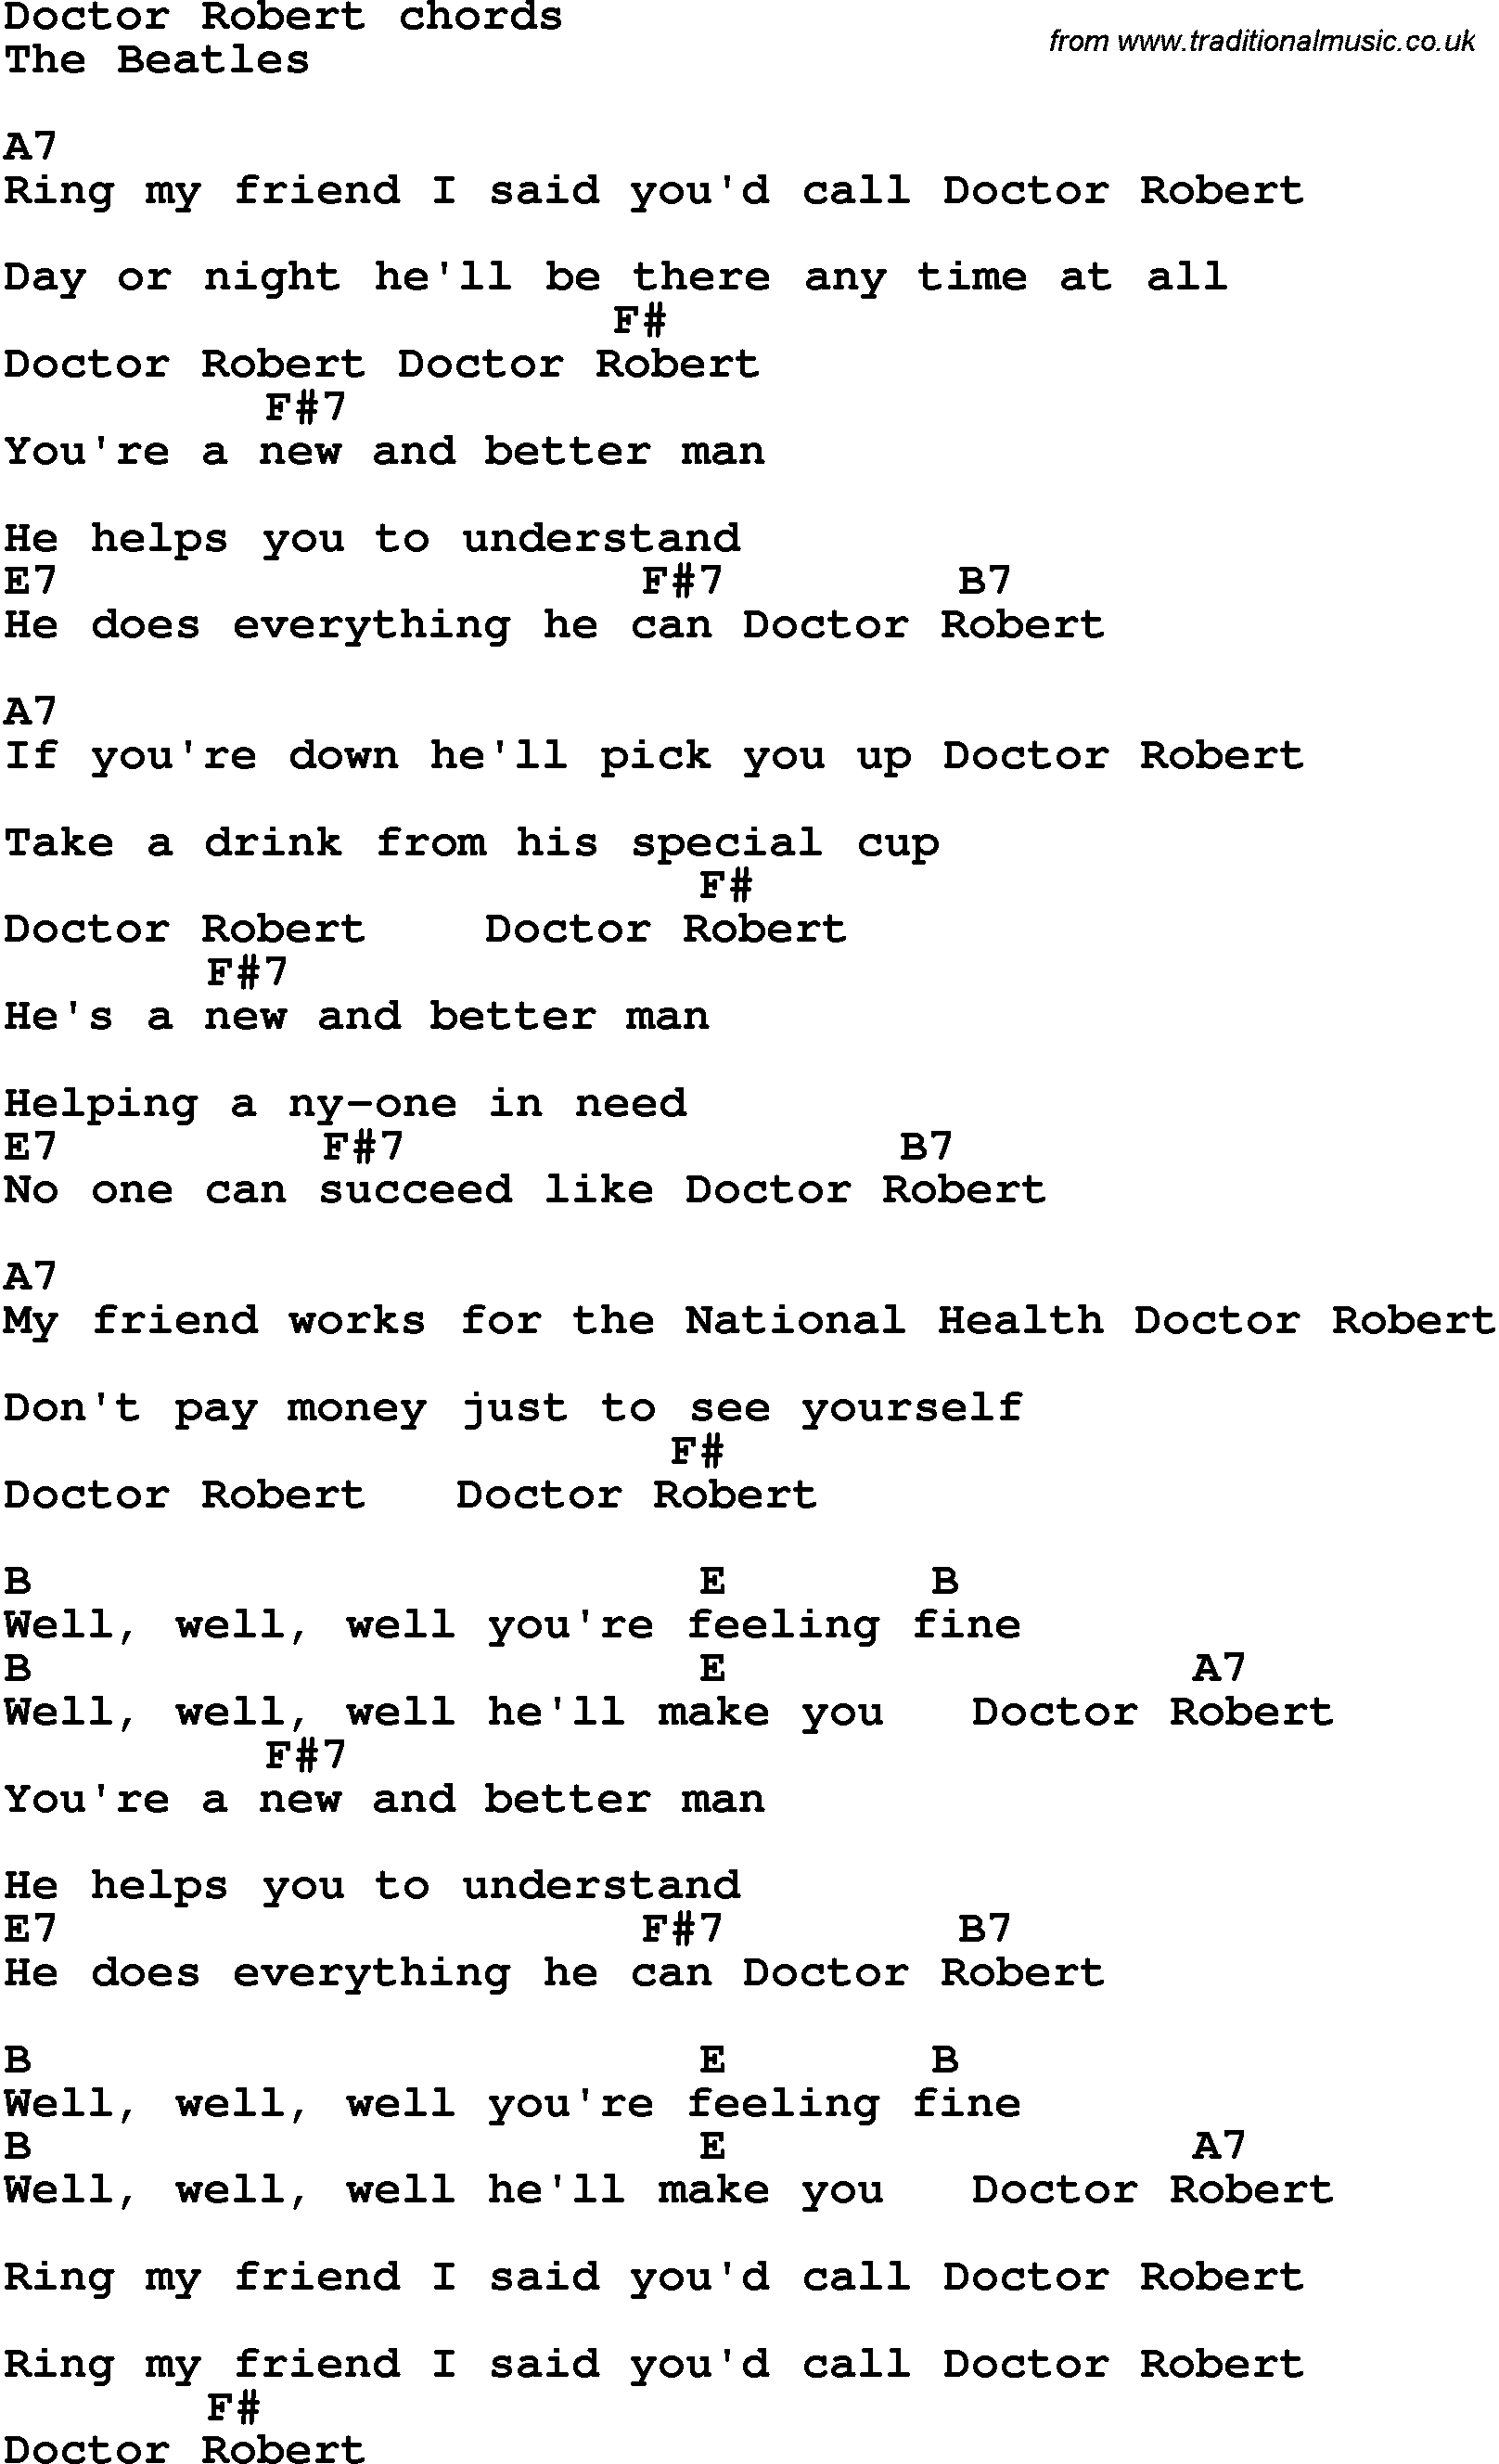 Song Lyrics with guitar chords for Doctor Robert - The Beatles